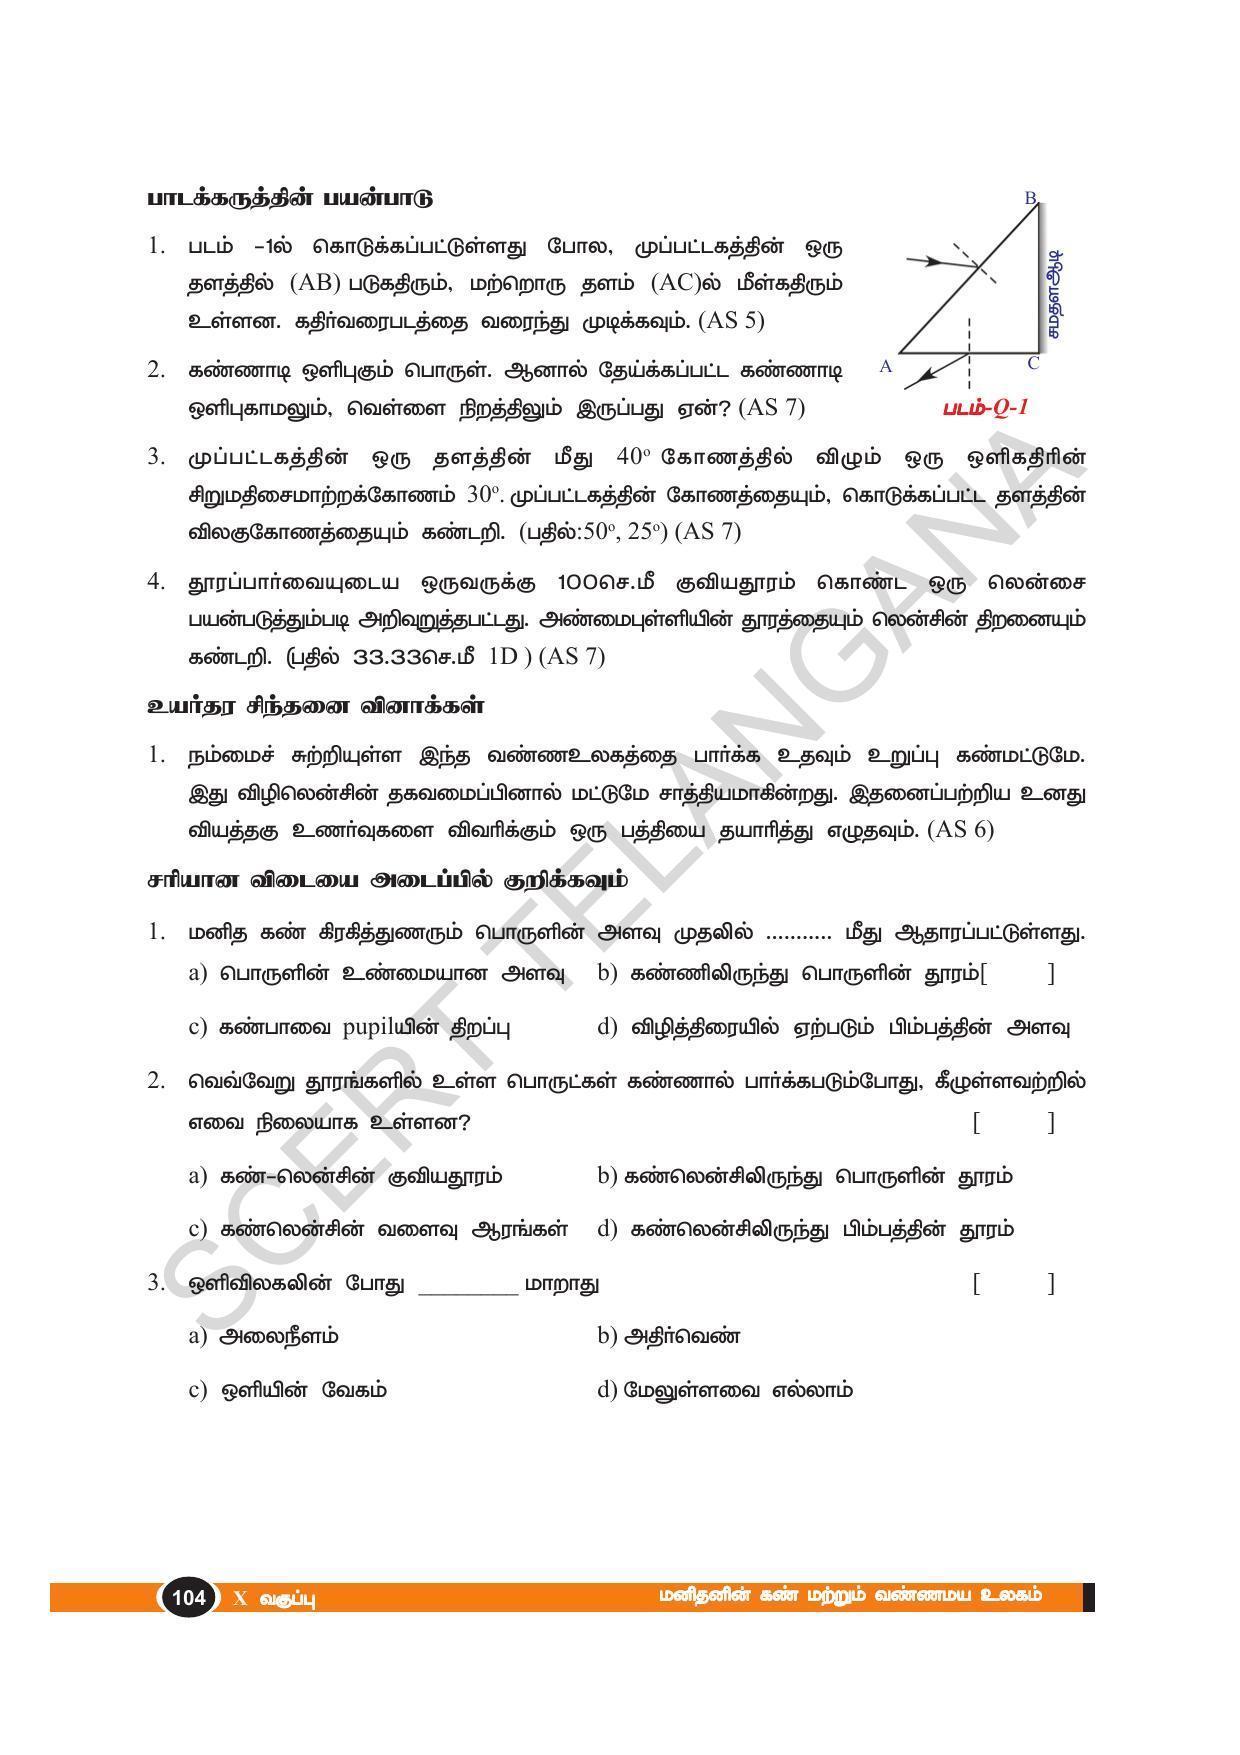 TS SCERT Class 10 Physical Science(Tamil Medium) Text Book - Page 116